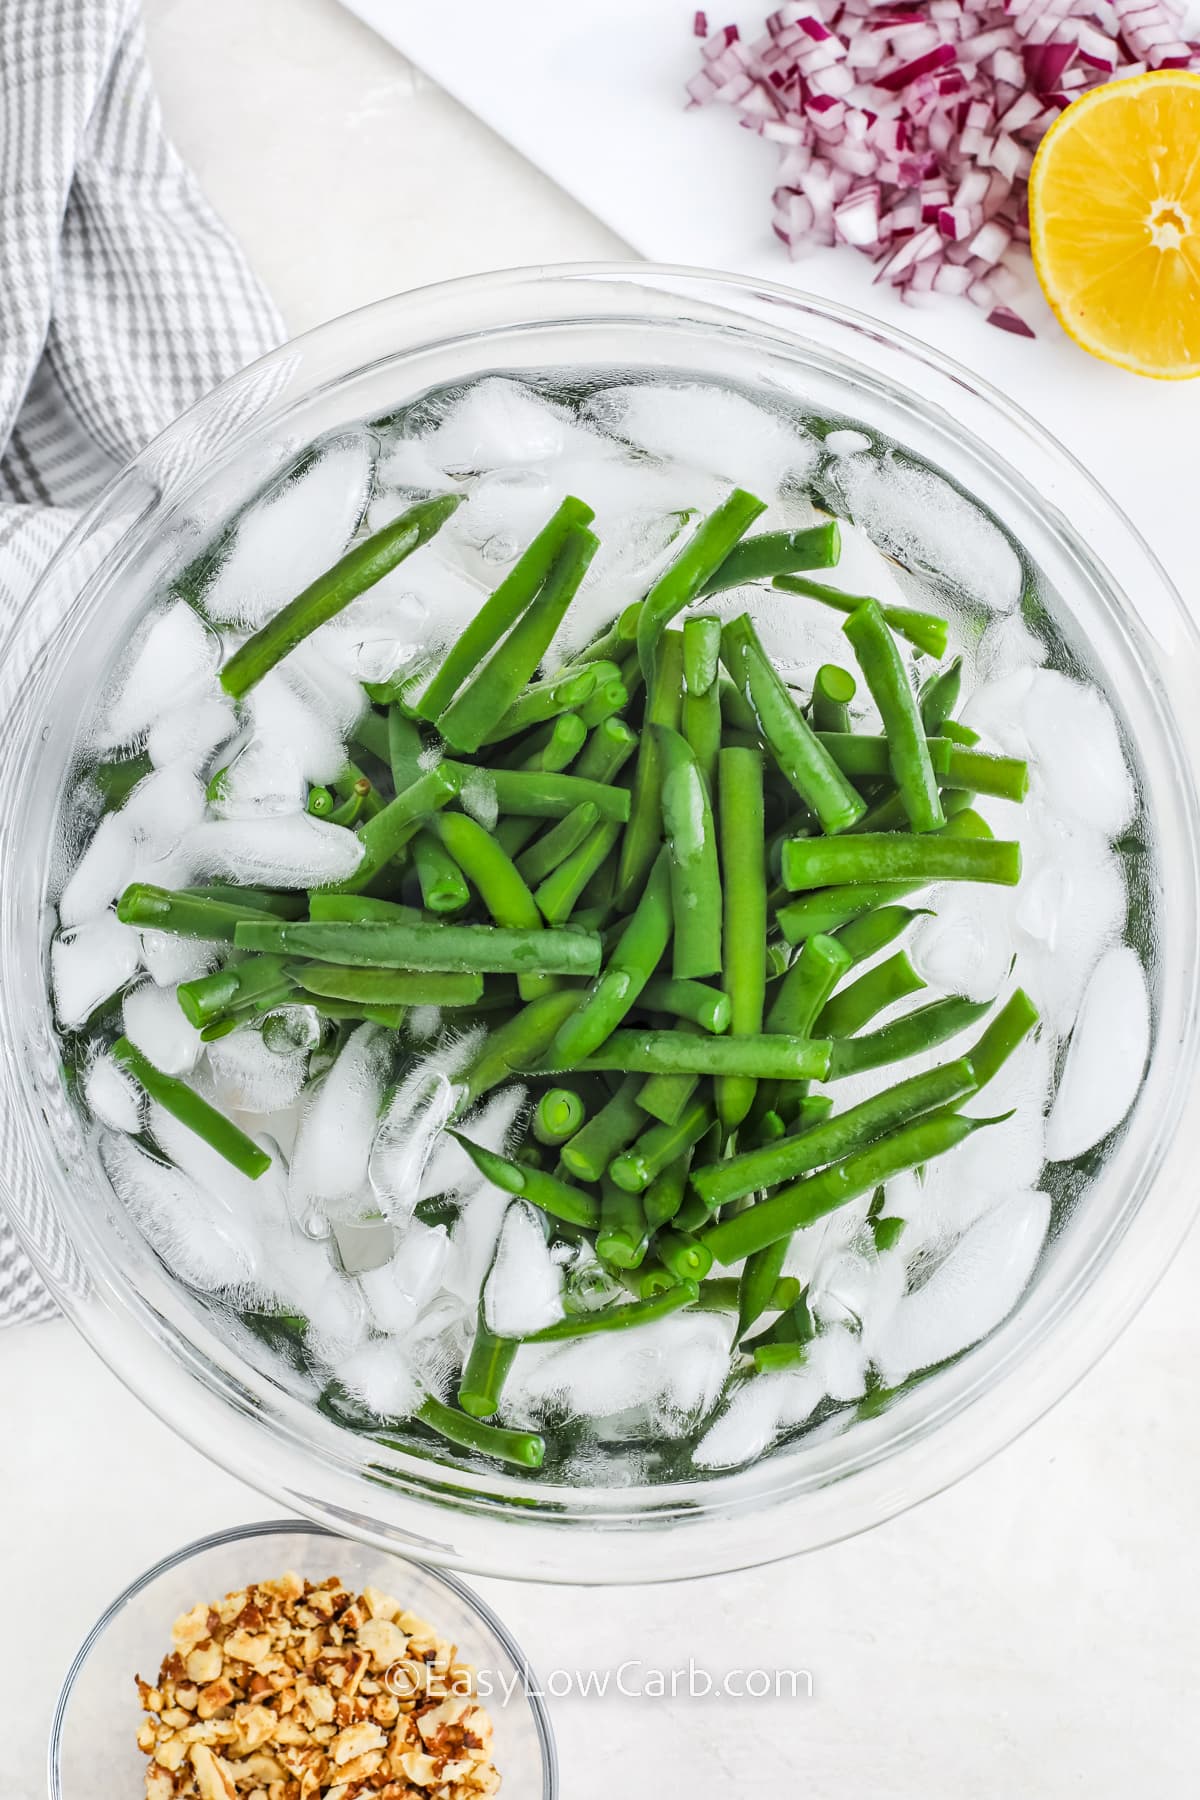 green beans in an ice bath with remaining green bean salad ingredients around it.